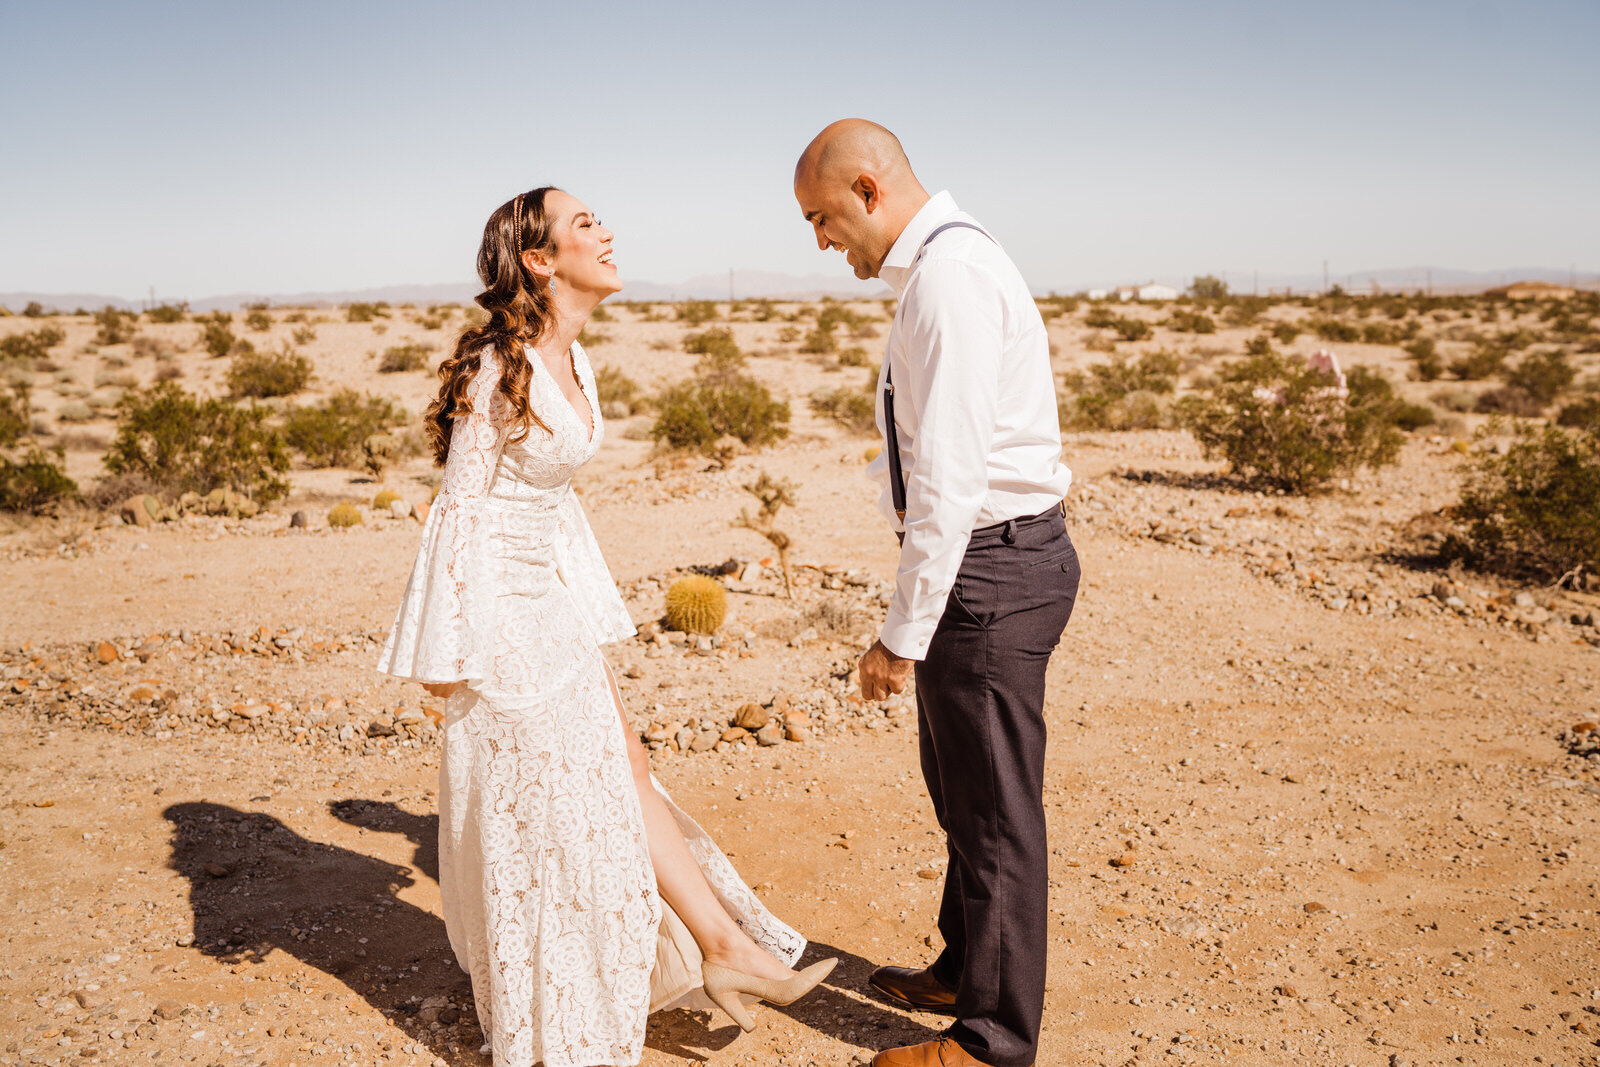 Bride and groom laugh during first look in Joshua Tree | photo by Kept Record | www.keptrecord.com